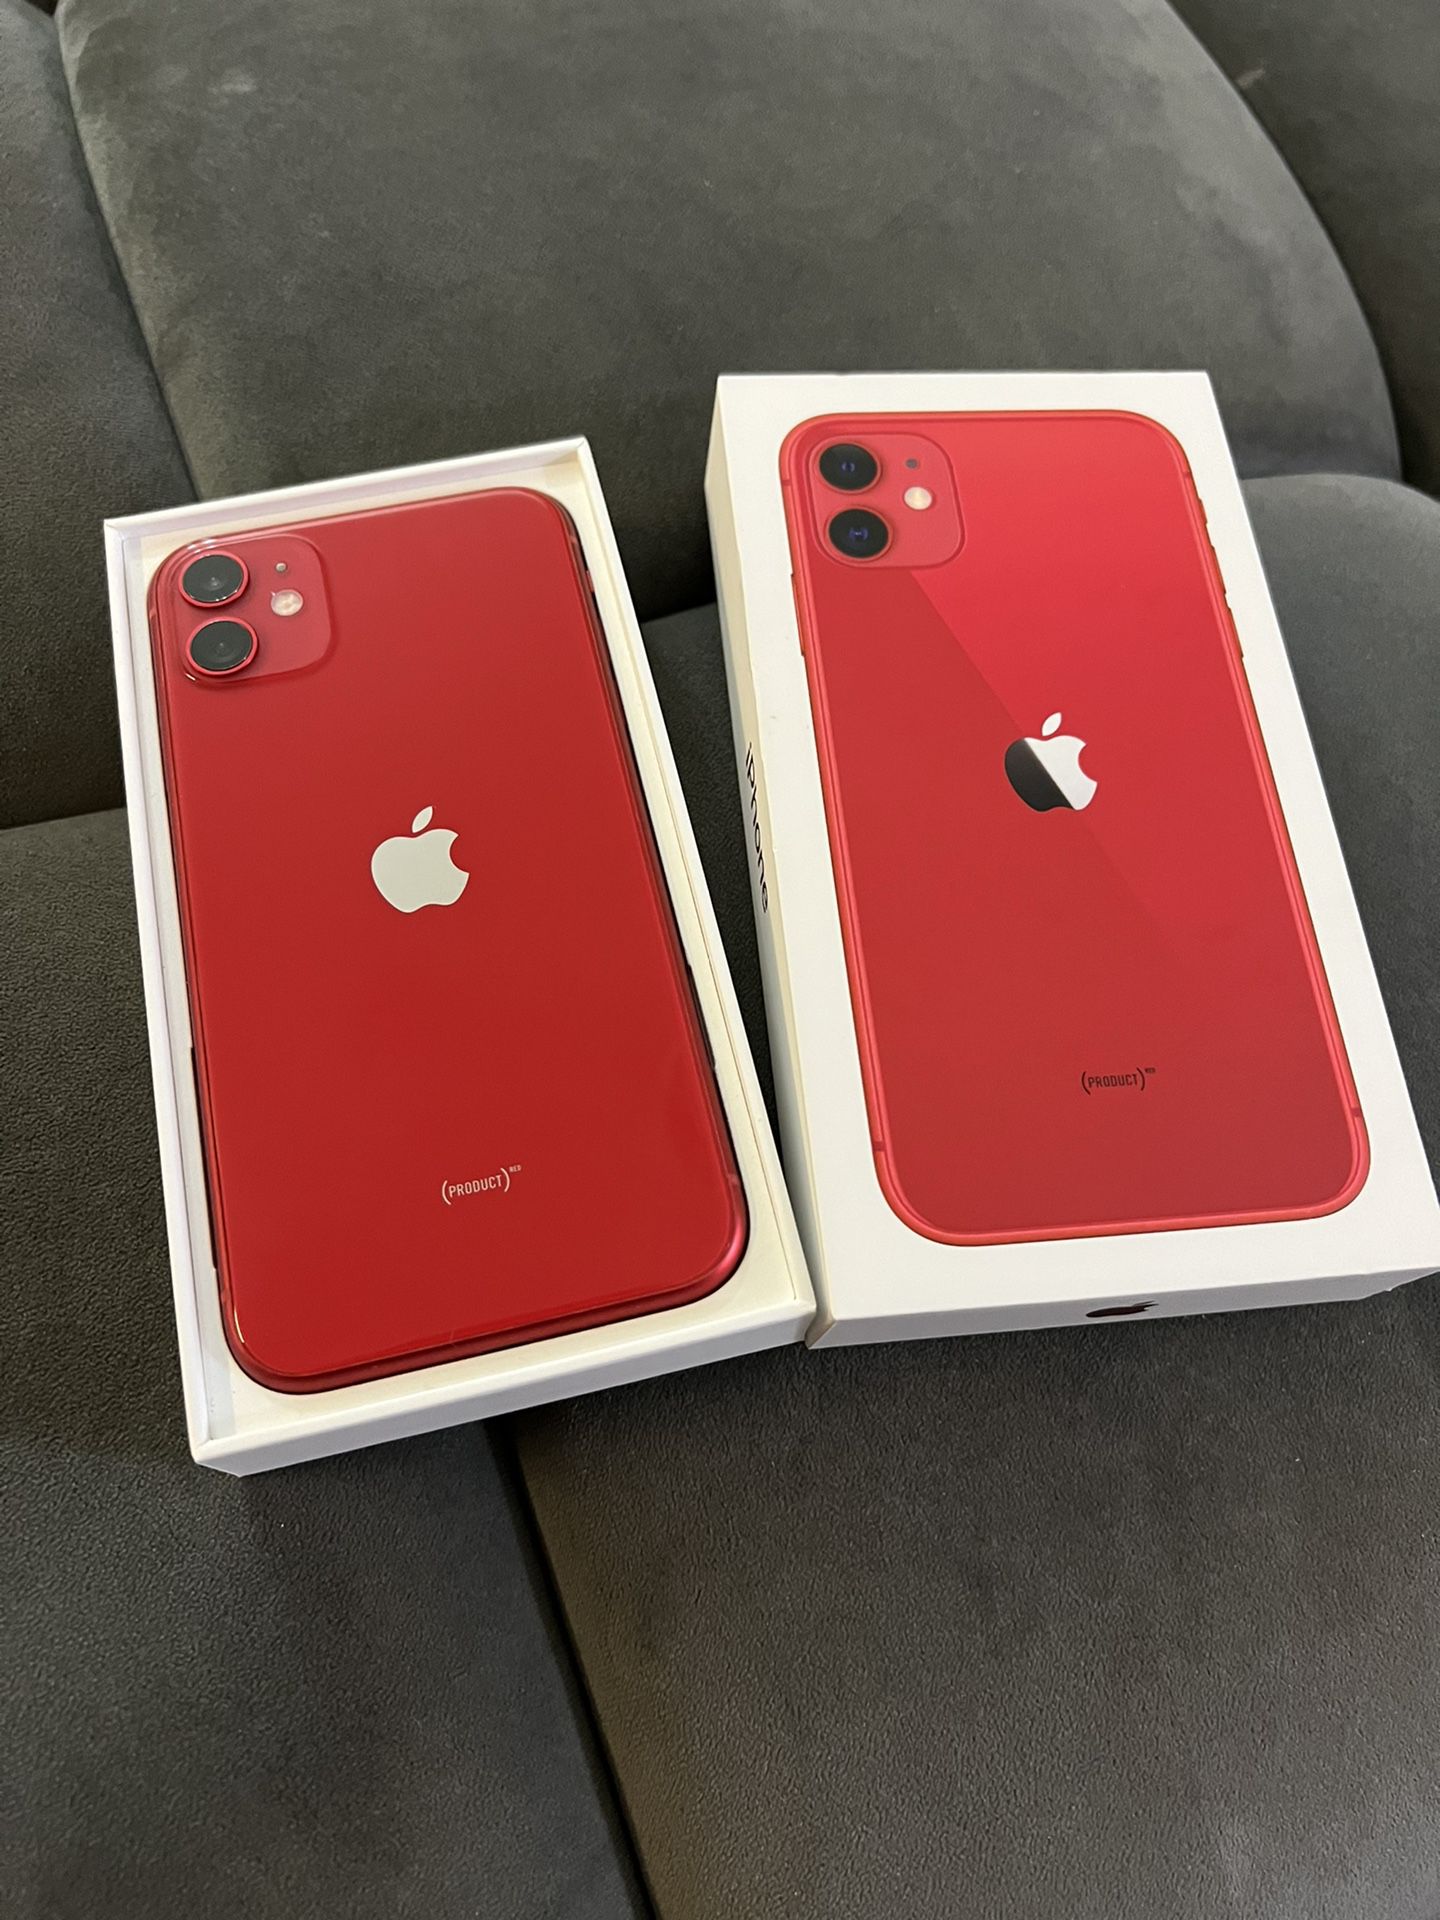 Iphone 11 Red 64gb Unlocked Sale For Sale In Orlando Fl Offerup